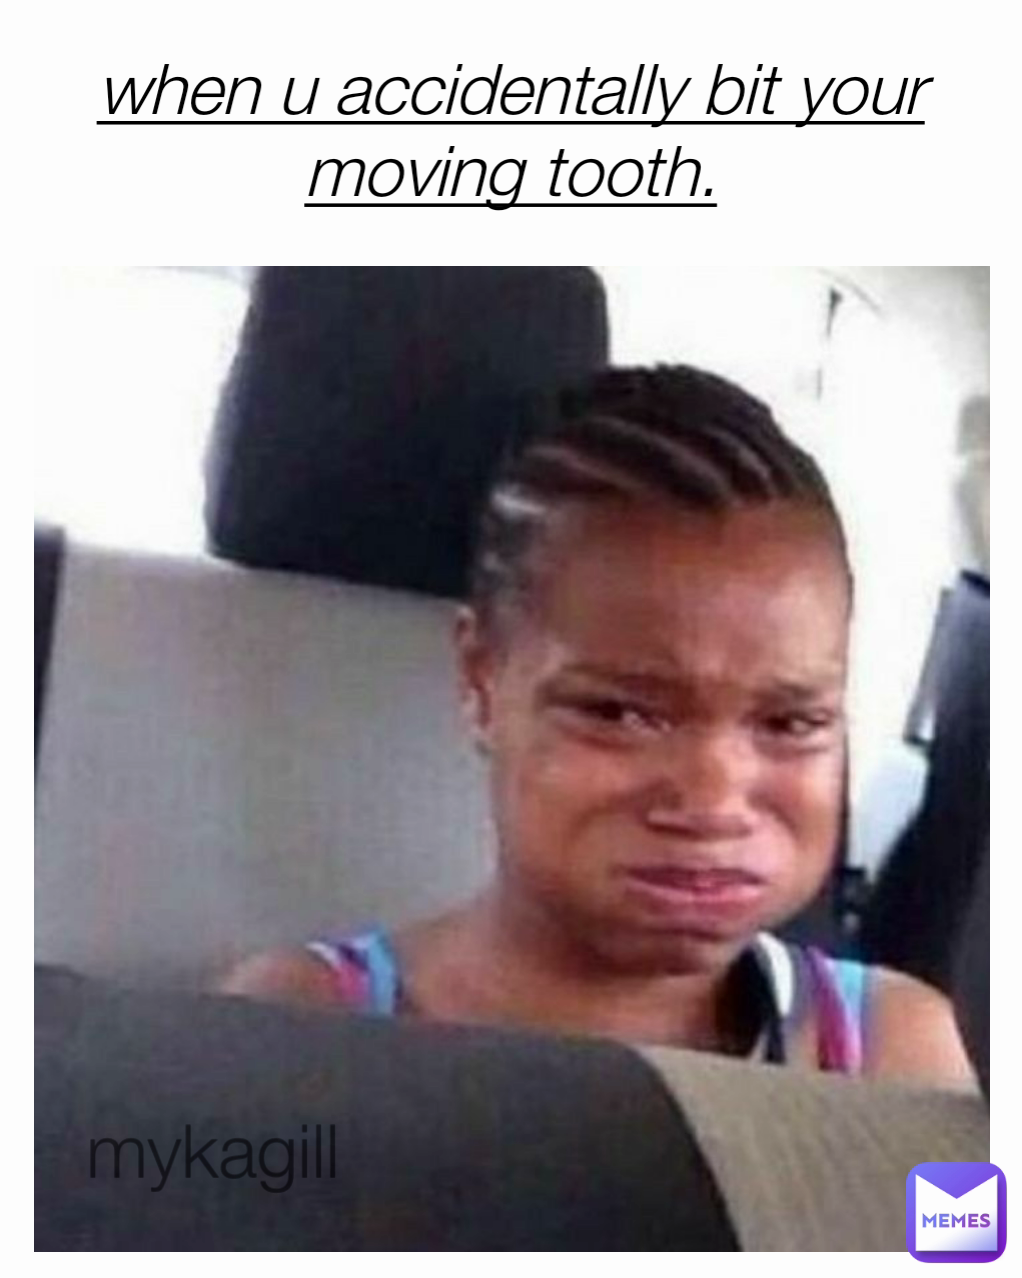 when u accidentally bit your moving tooth. mykagill